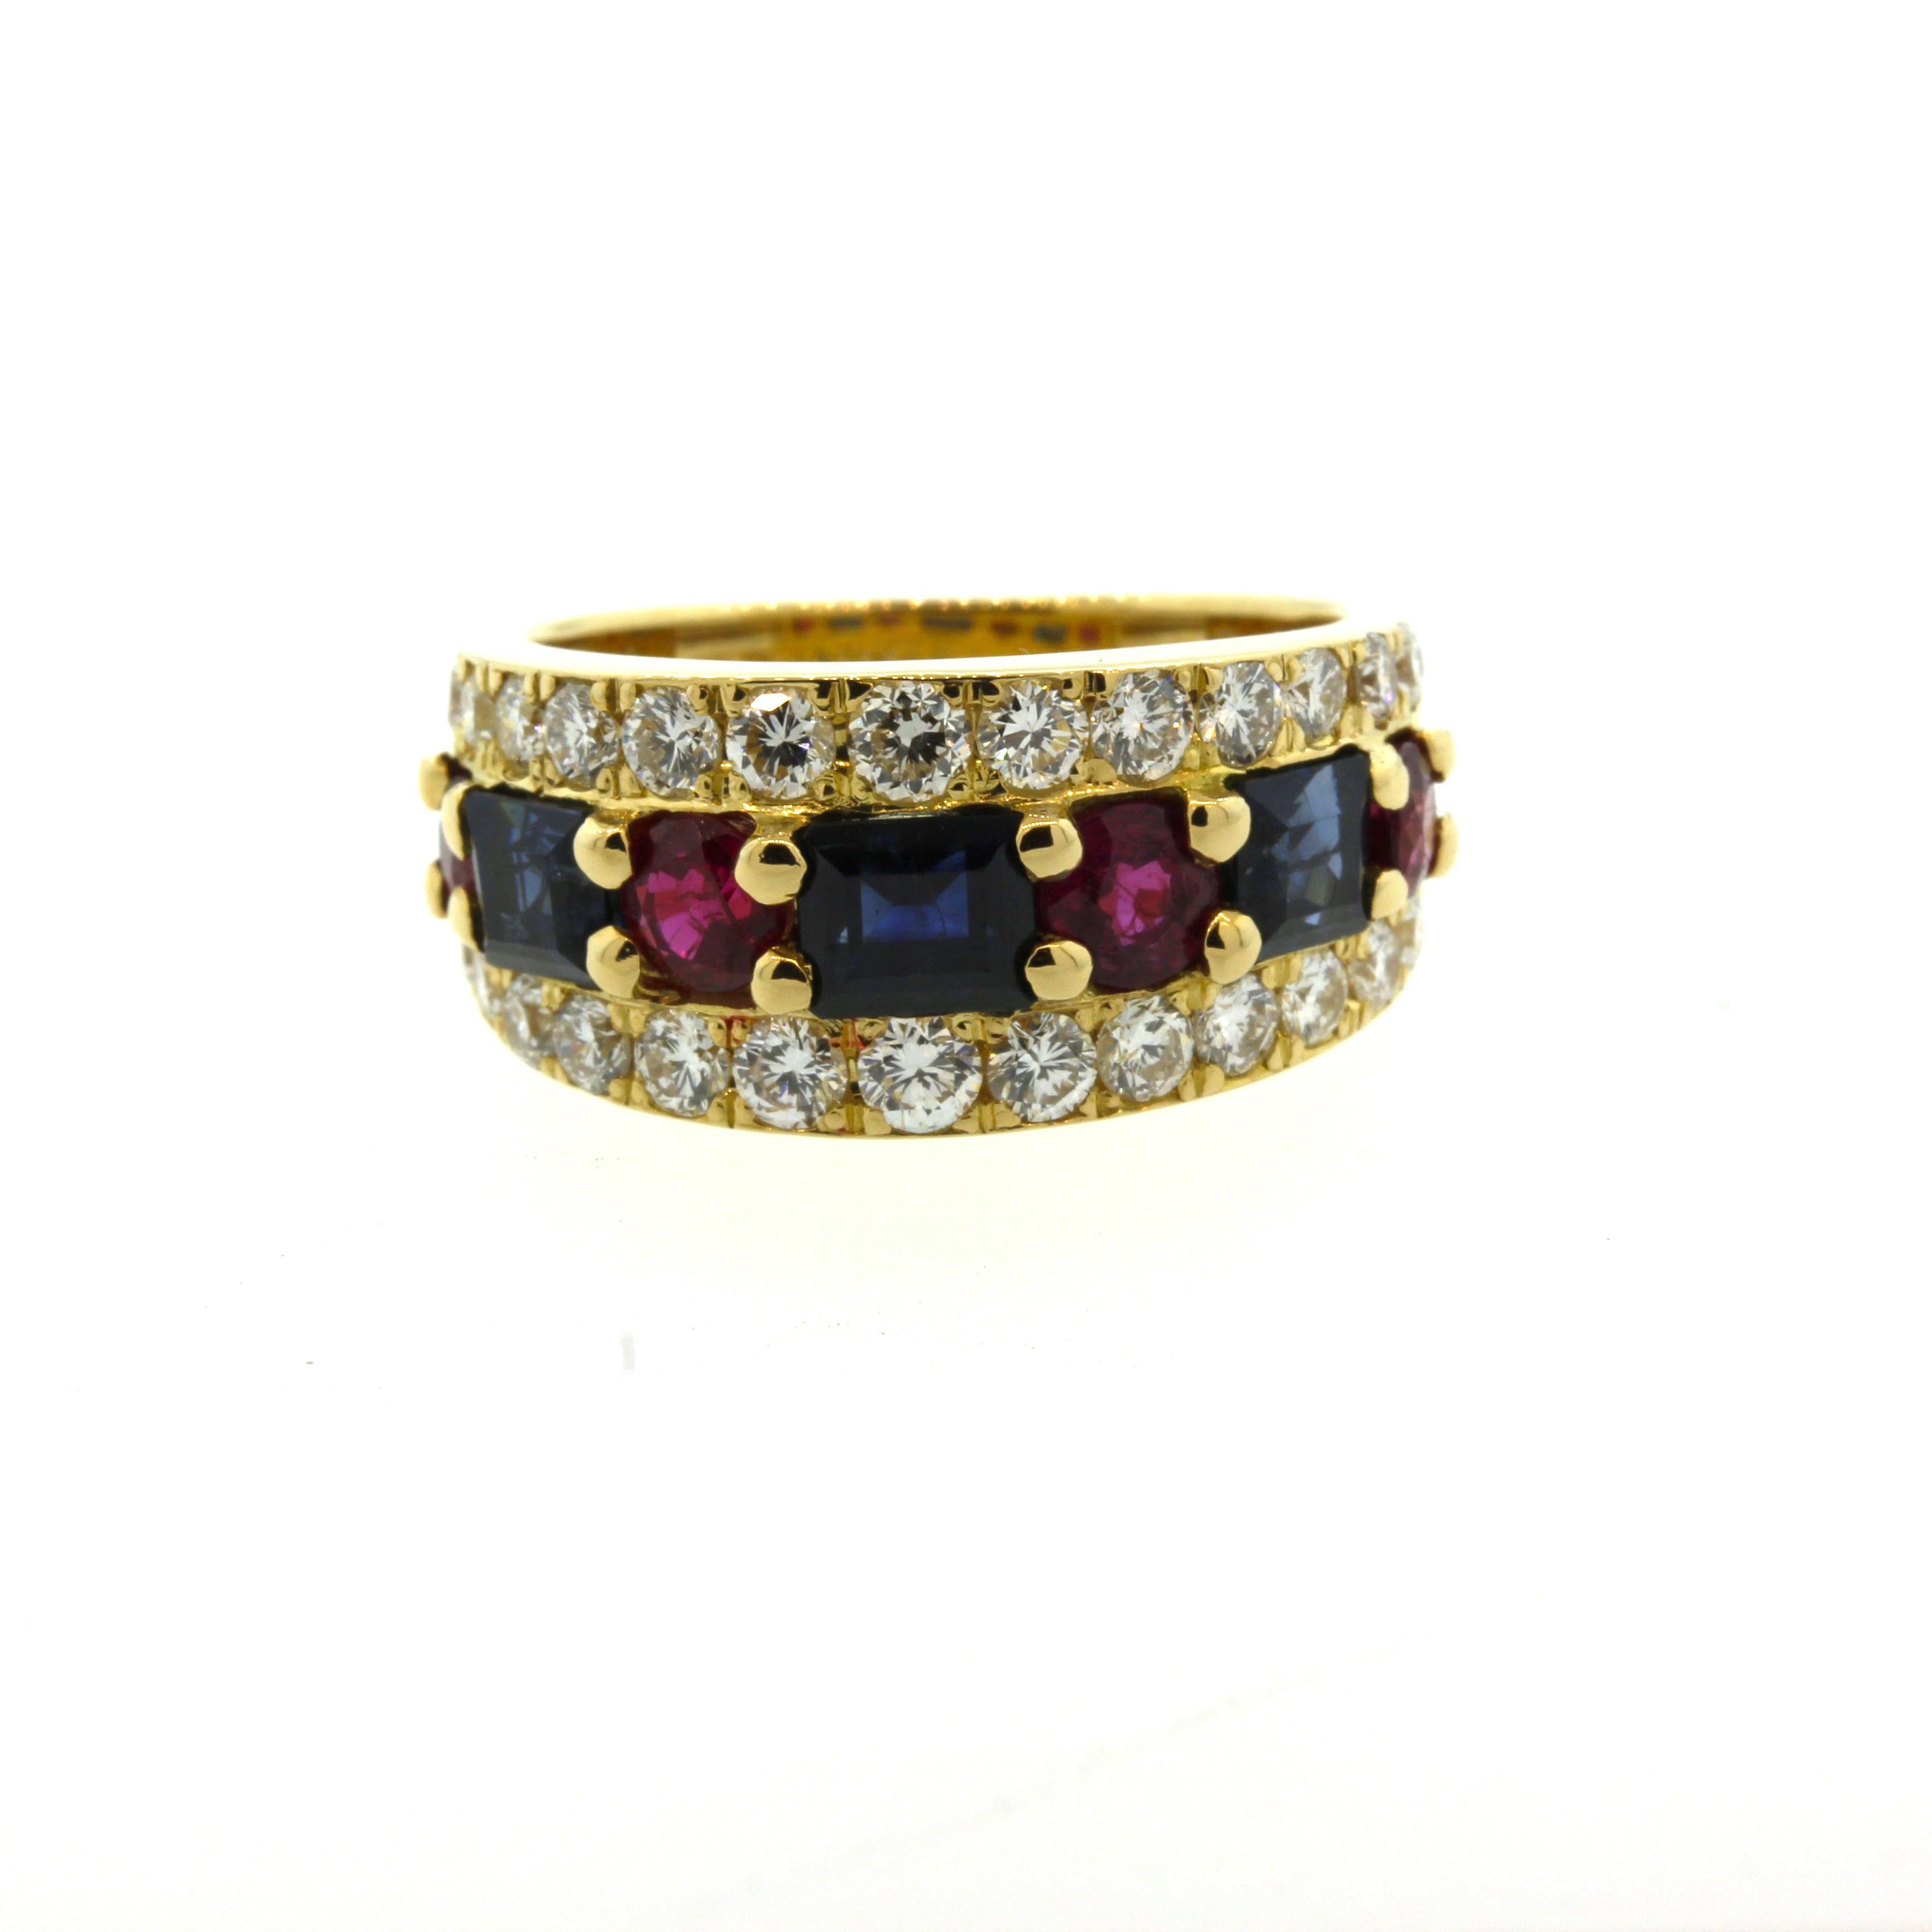 A sweet and stylish gold band ring featuring rubies, sapphires, and diamonds! There are 4 round shape rubies weighing a total of 0.99 carats along with 3 square shape sapphires weighing a total of 1.50 carats. Adding to the color are 1.02 carats of